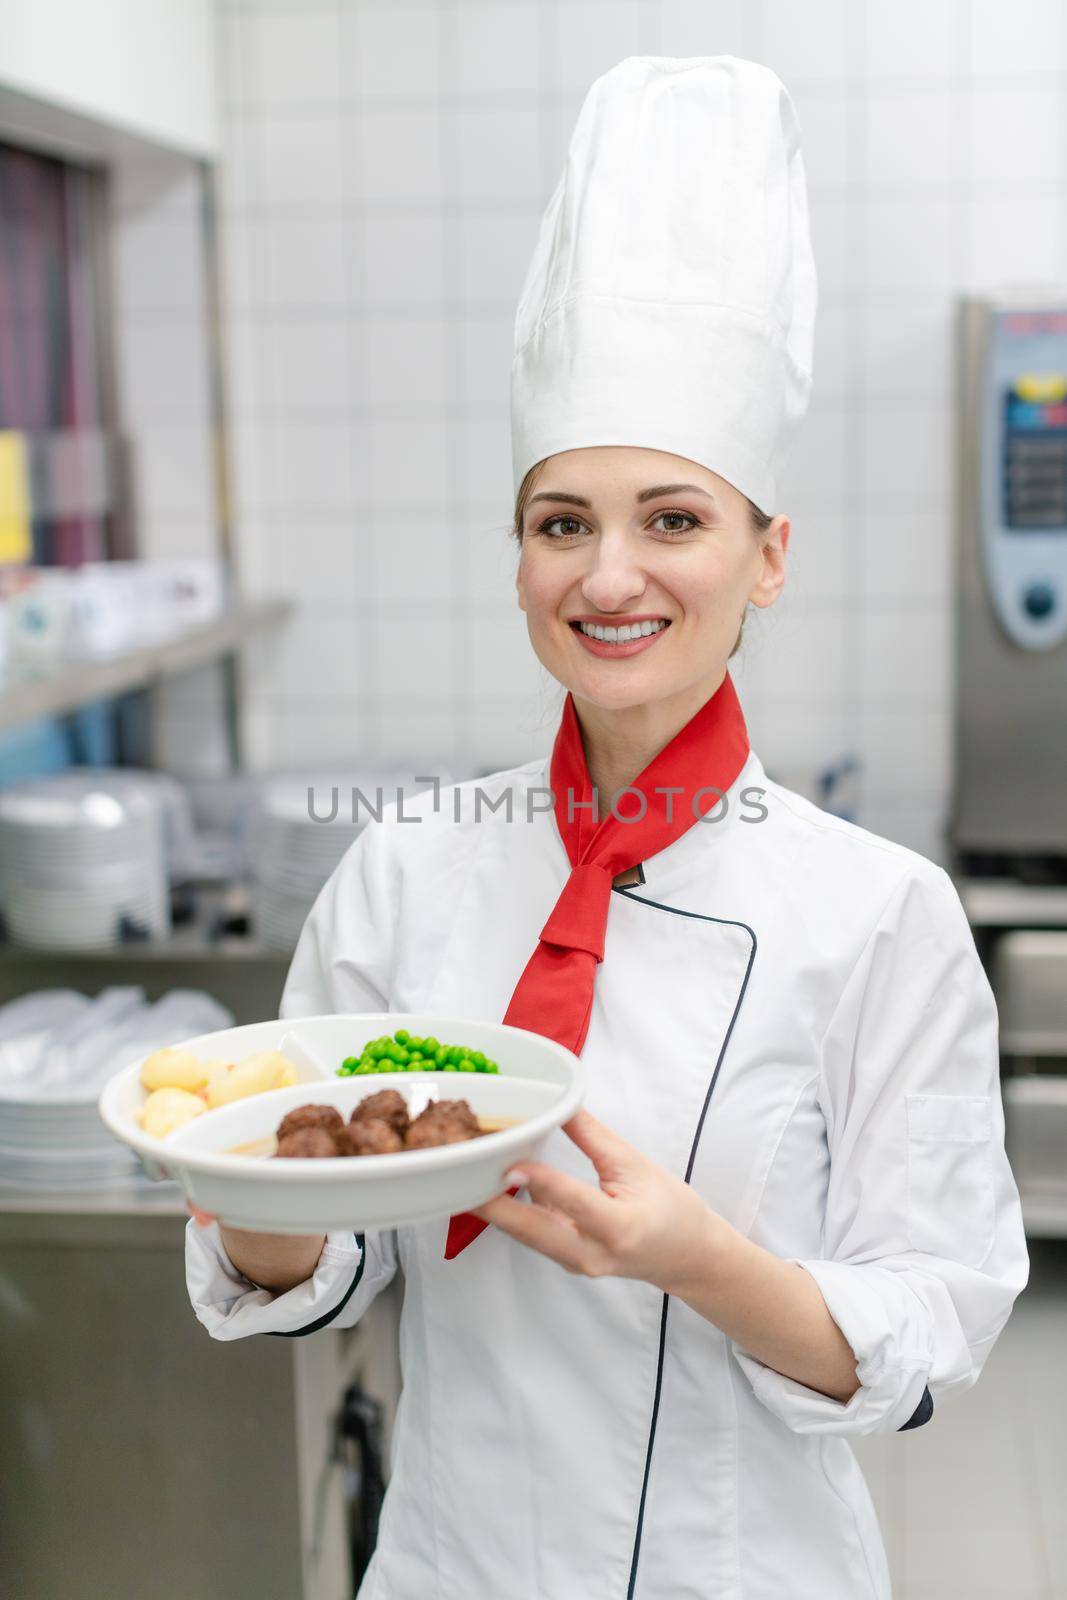 Cook showing plate with food in commercial kitchen of canteen by Kzenon